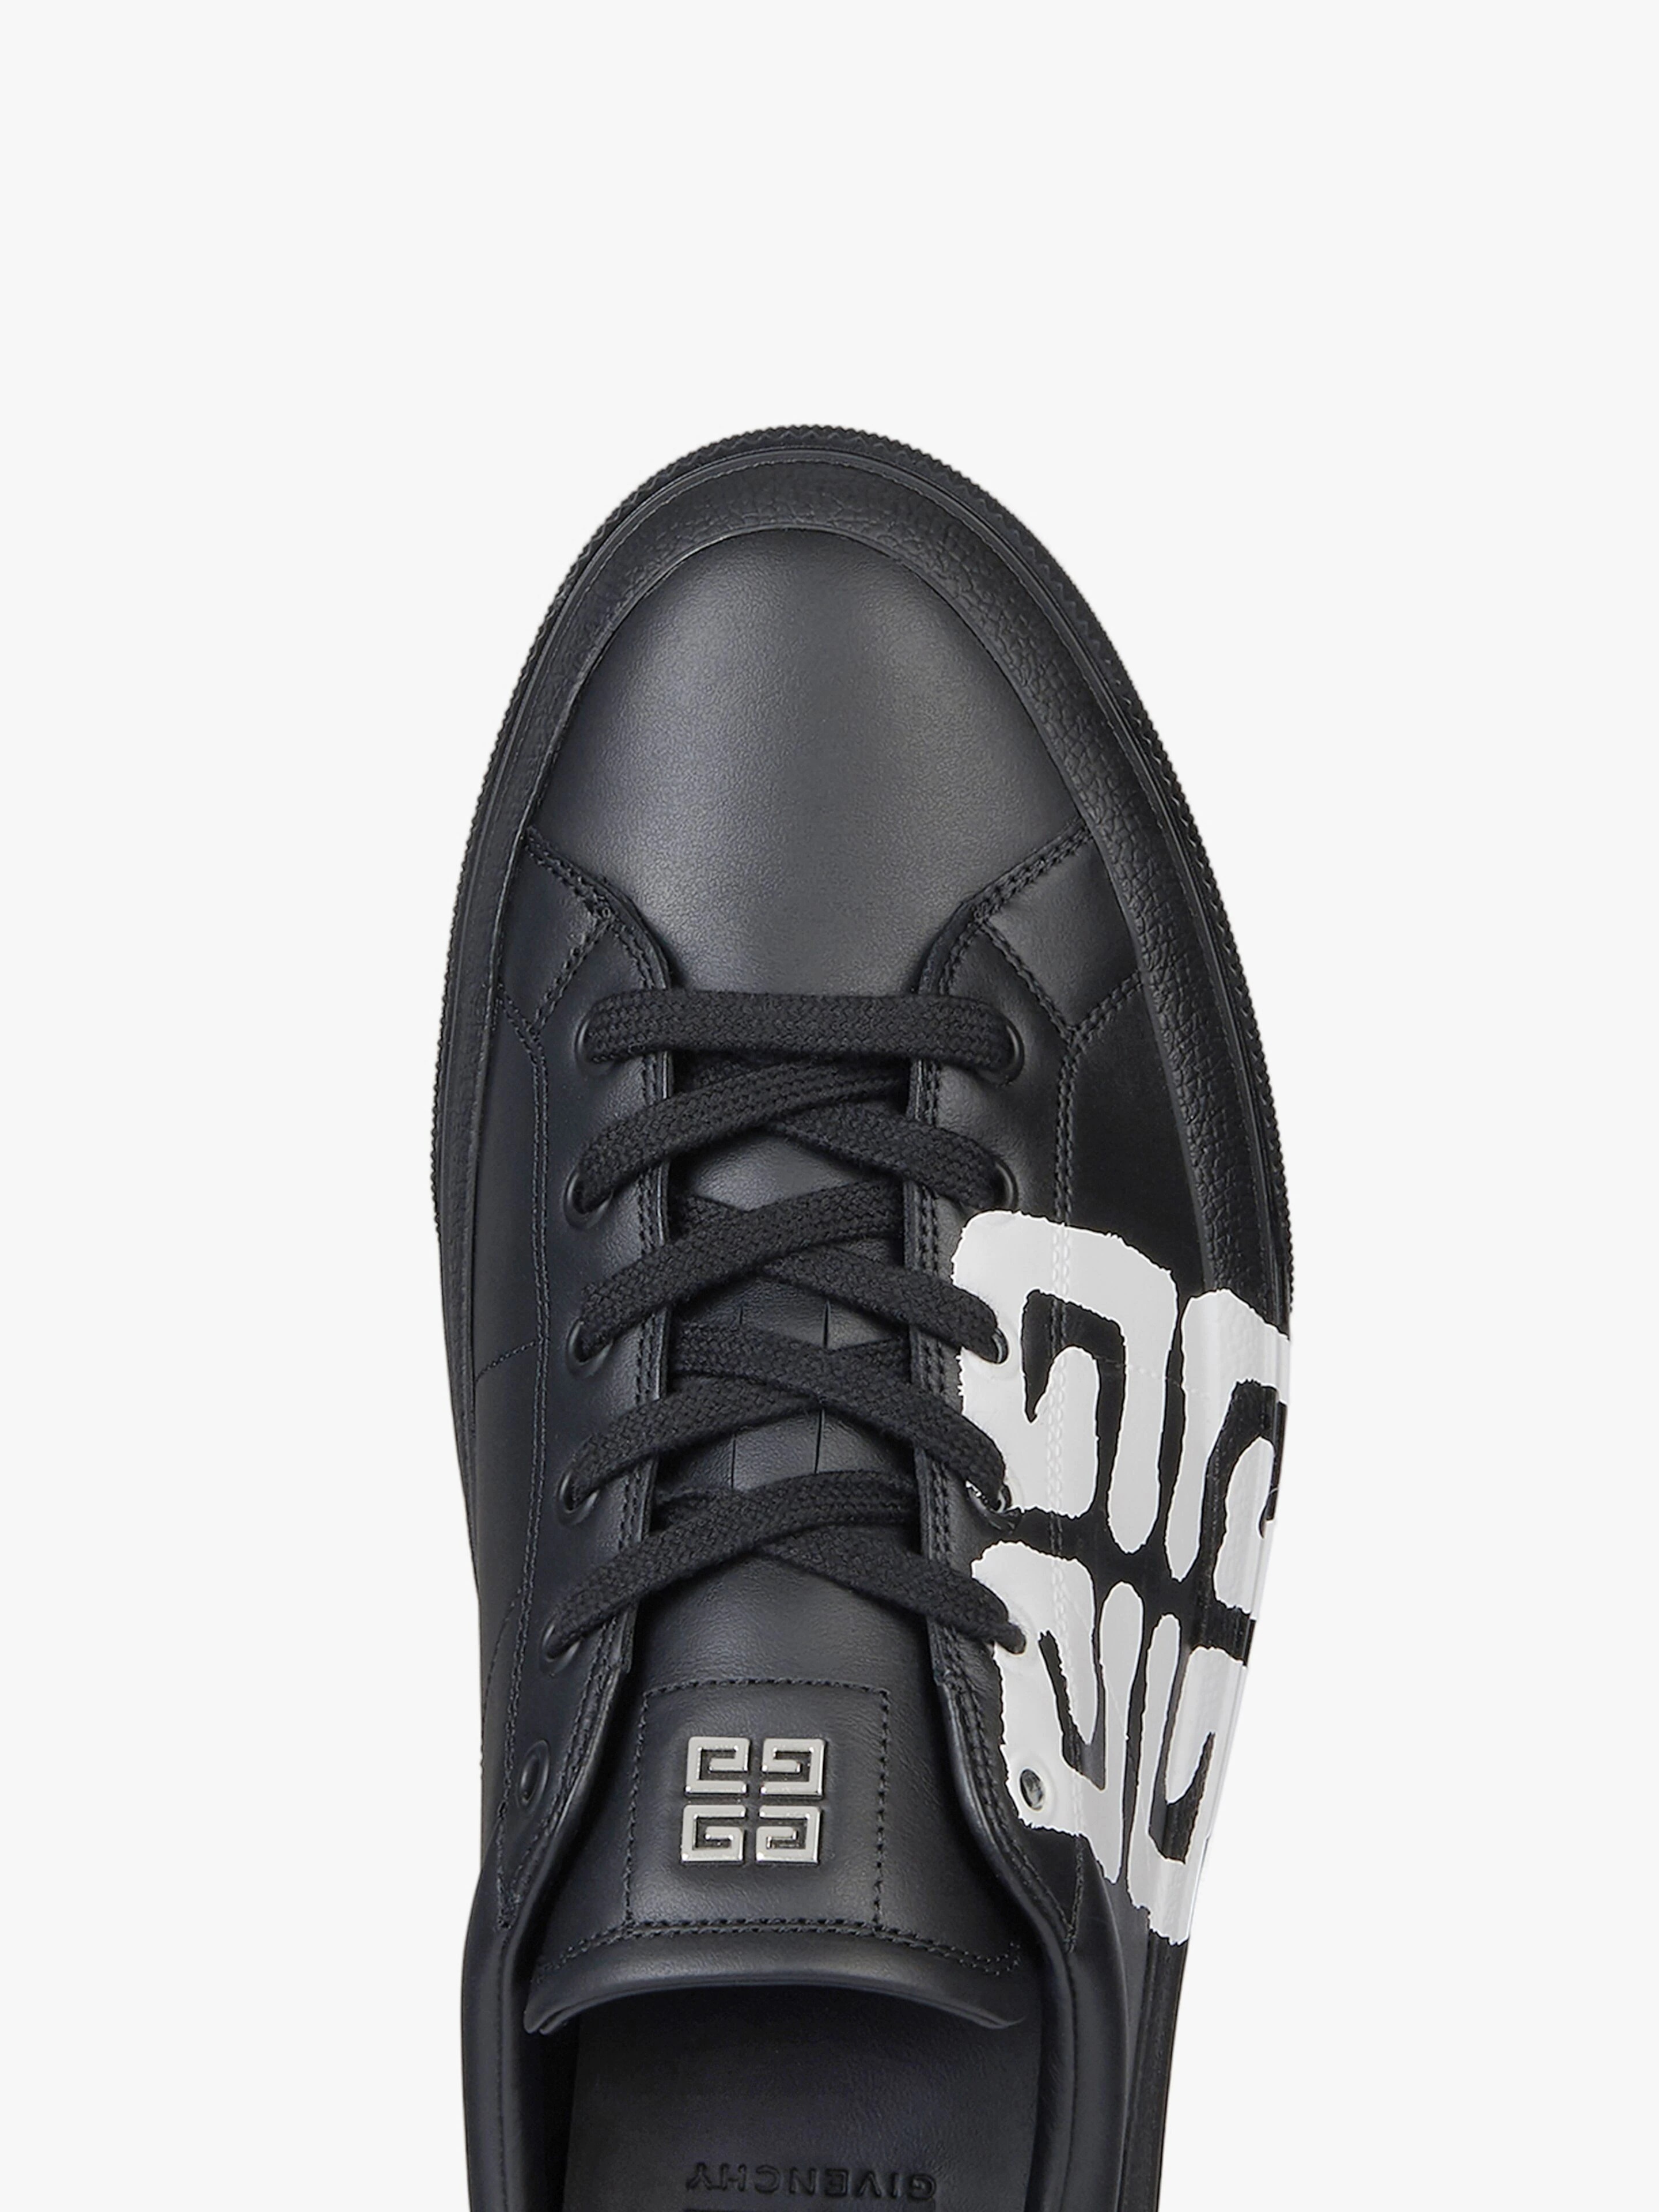 CITY SPORT SNEAKERS IN LEATHER WITH TAG EFFECT 4G PRINT - 6